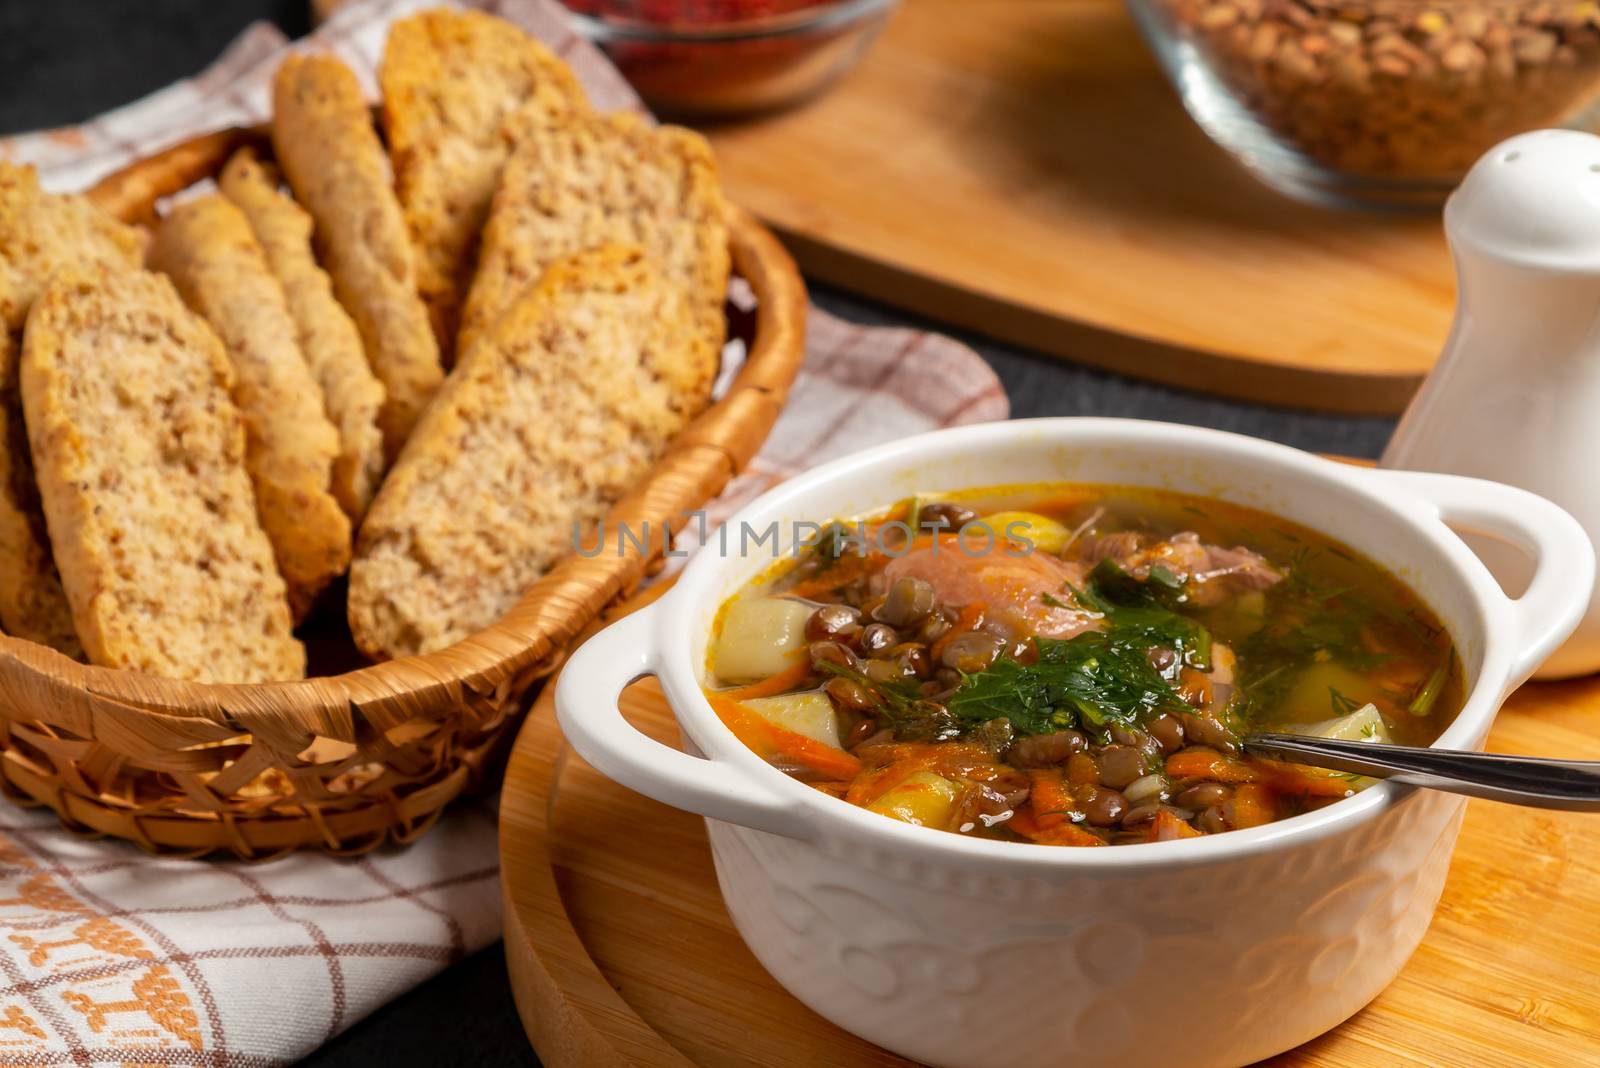 Lentil soup with chicken in a white bowl on a wooden board on a black table and ingredients.